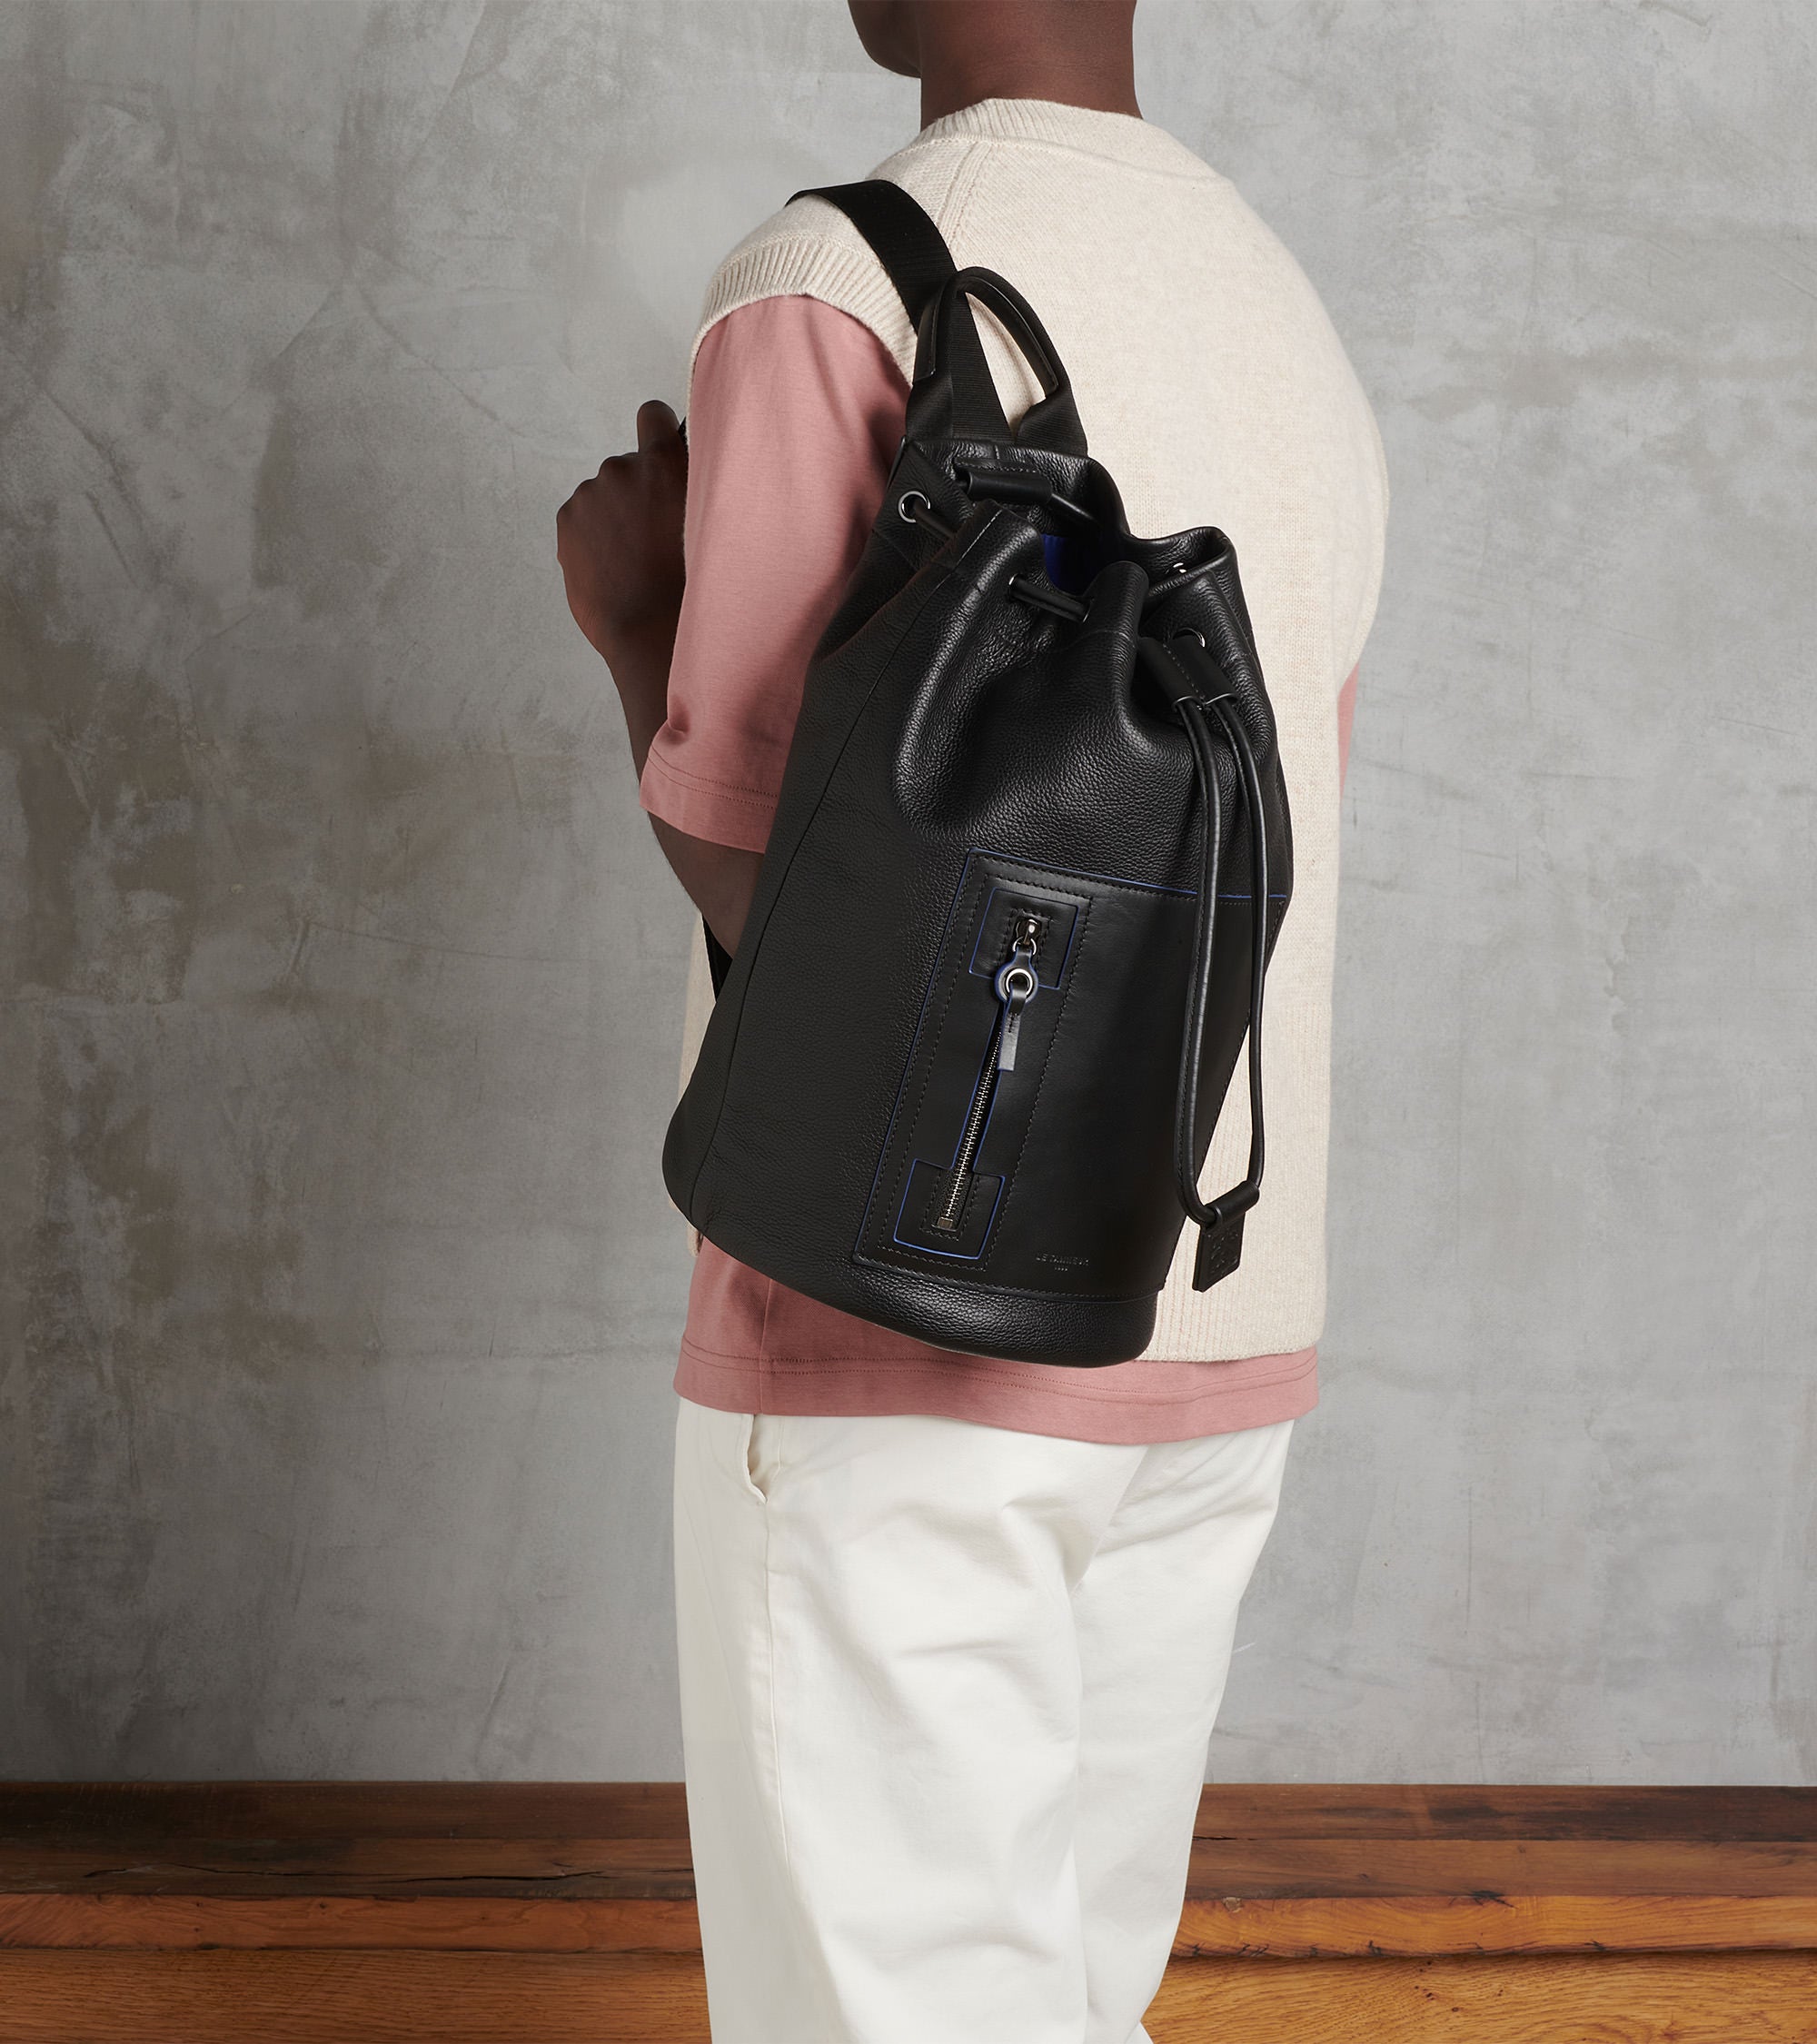 Alexis backpack in grained leather